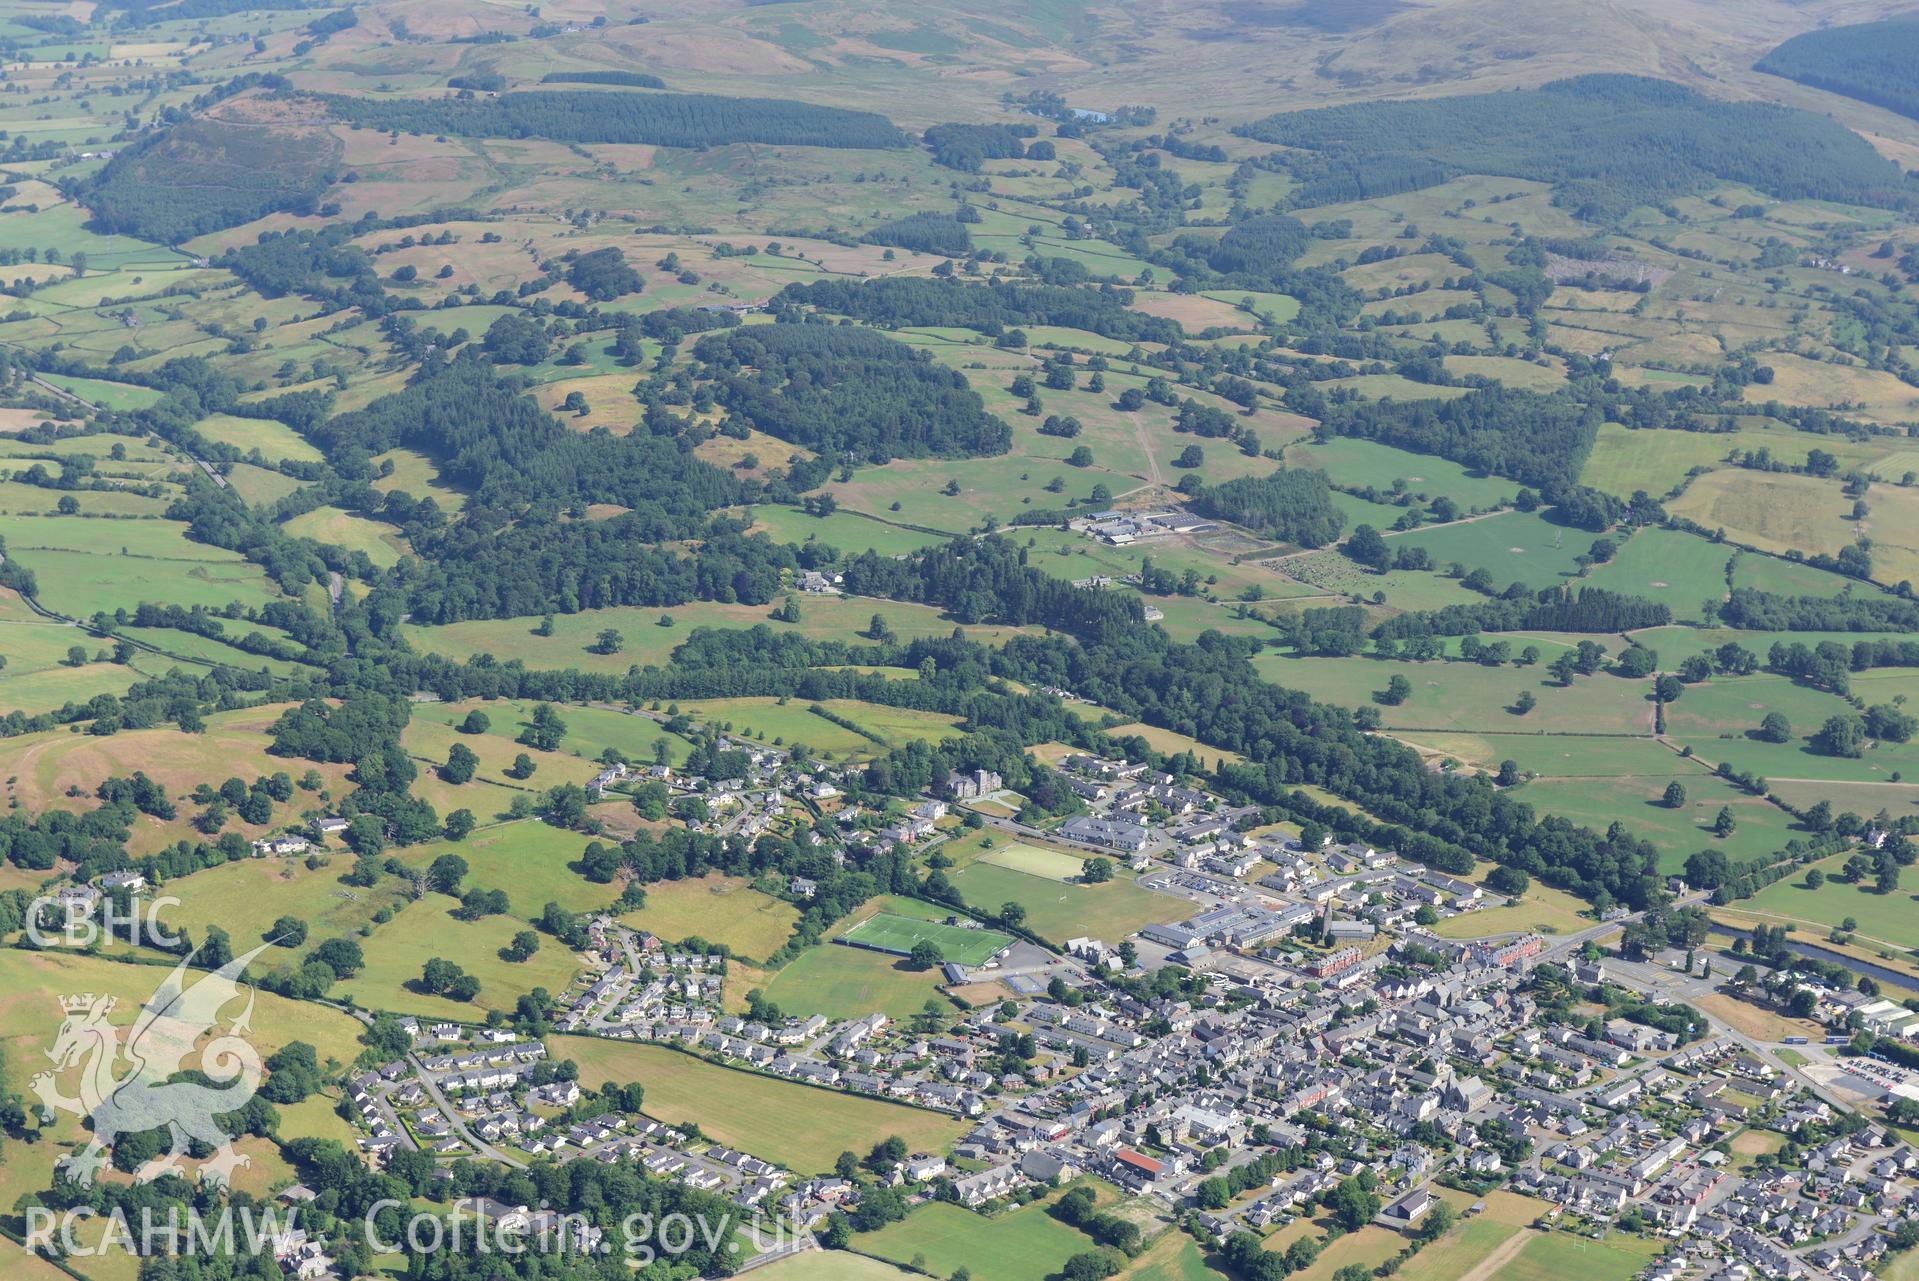 Royal Commission aerial photography of Bala town and environs taken on 19th July 2018 during the 2018 drought.